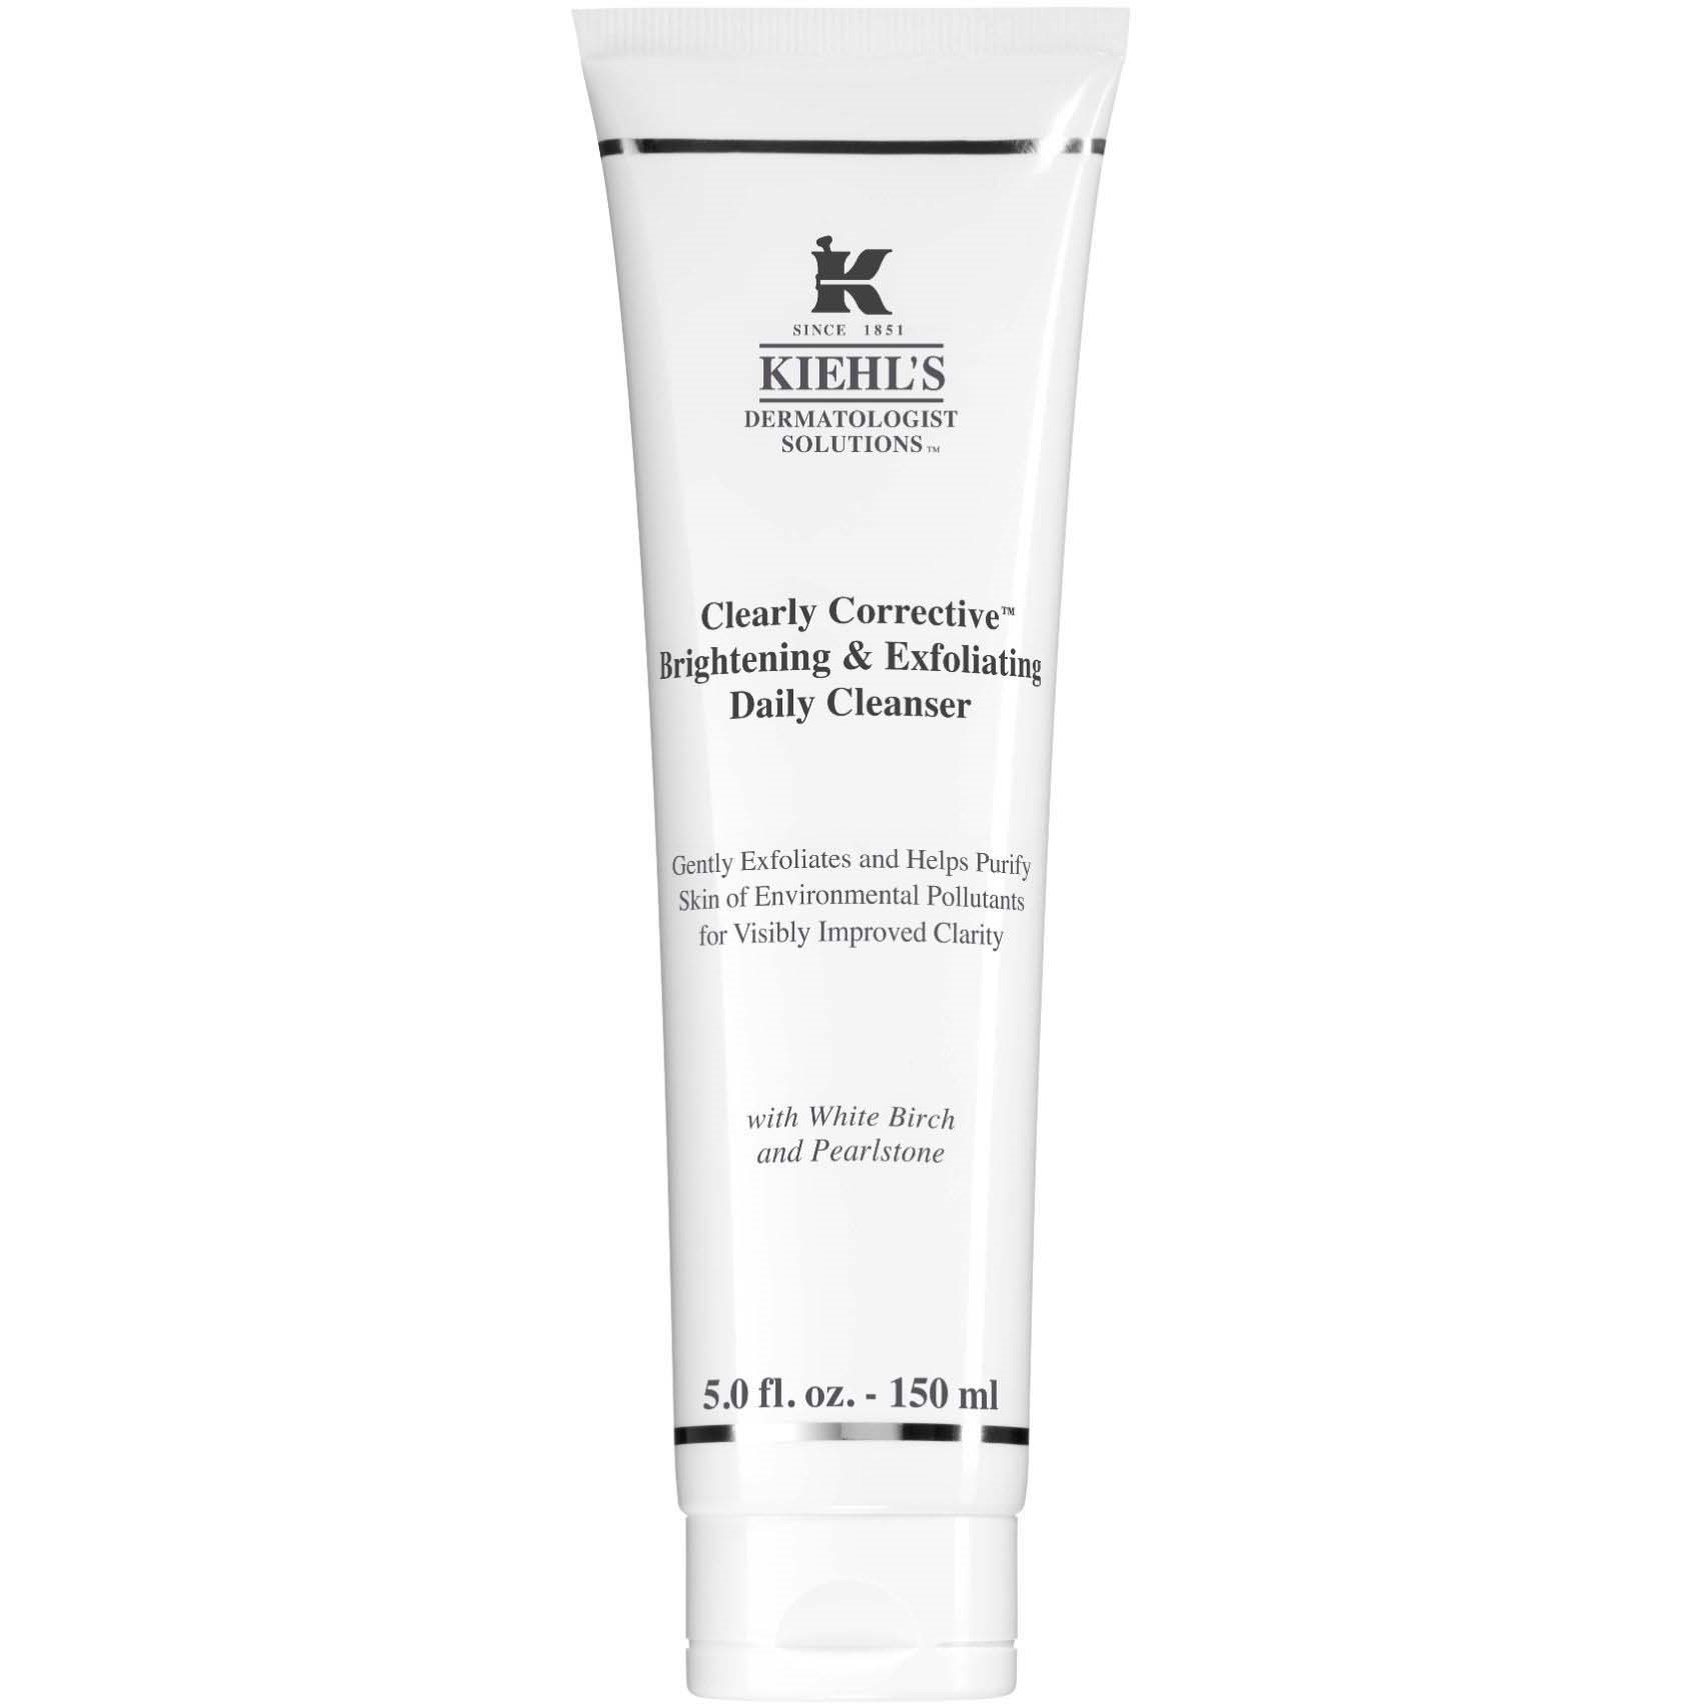 Läs mer om Kiehls Dermatologist Solutions Clearly Corrective Exfoliating Cleanse